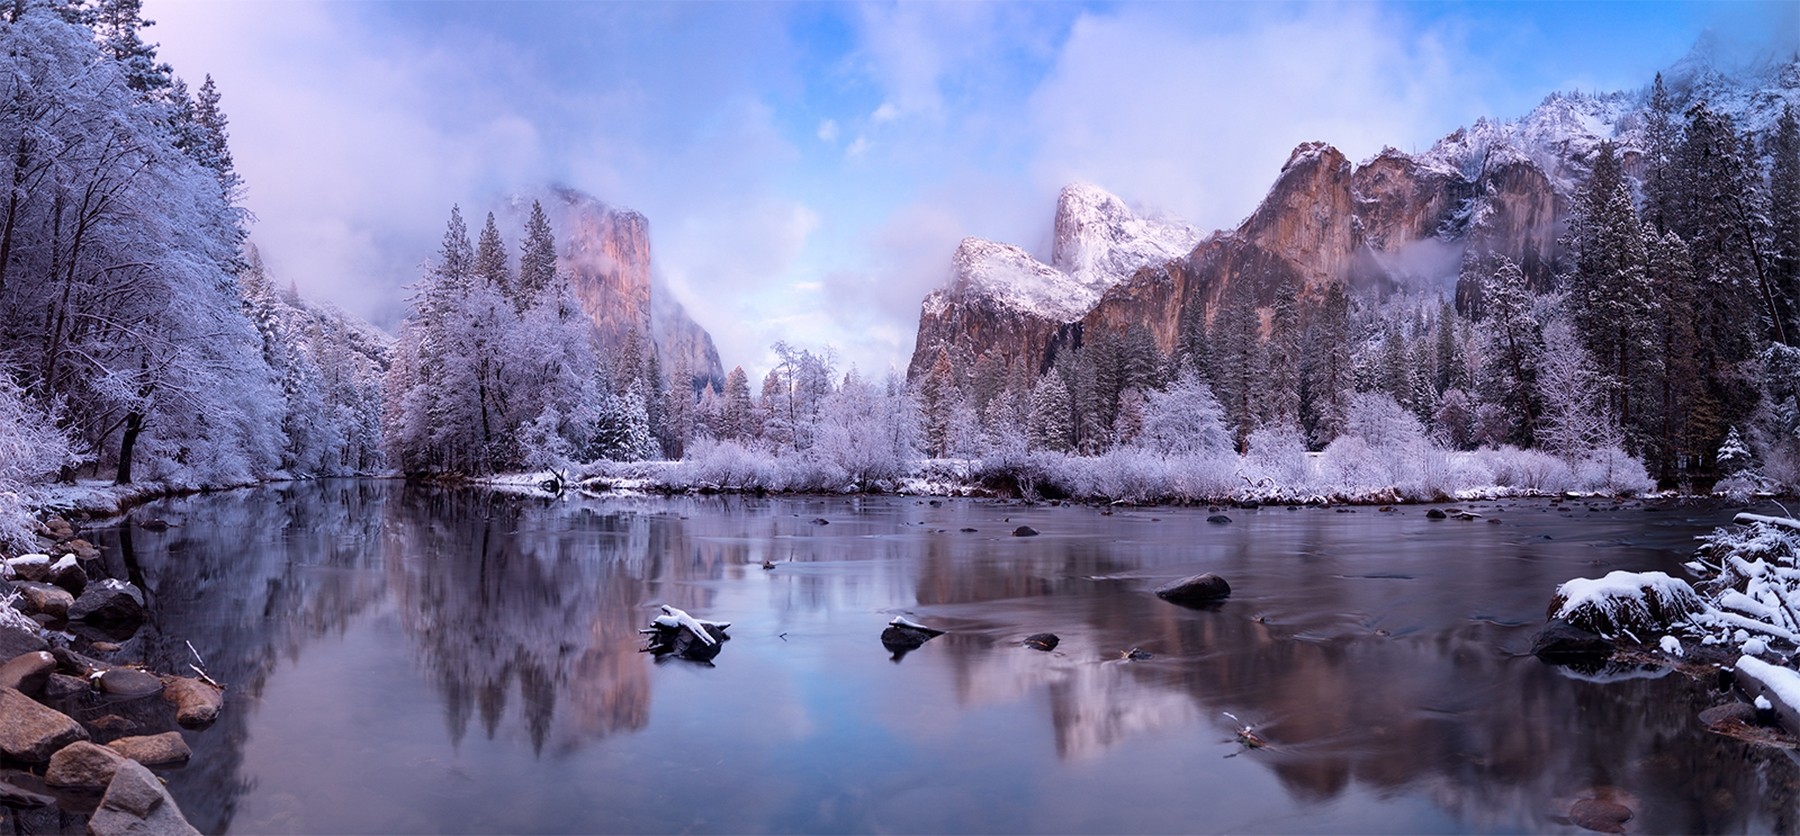 General 1800x836 landscape nature cold ice trees water outdoors mountains